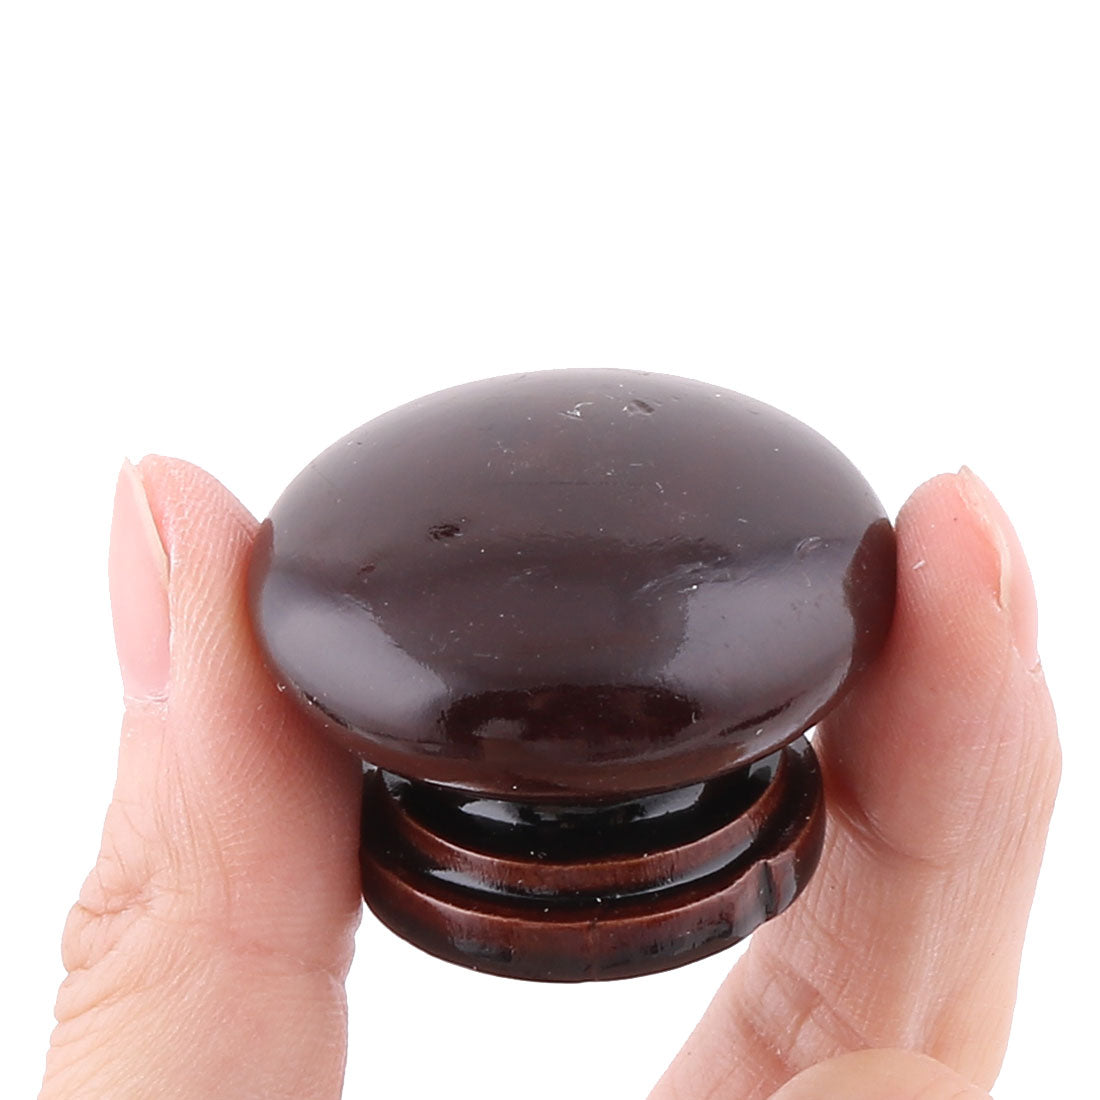 uxcell Uxcell Family Wood Round Furniture Wardrobe Pull Handle Handgrip Knob Chocolate Color 8pcs